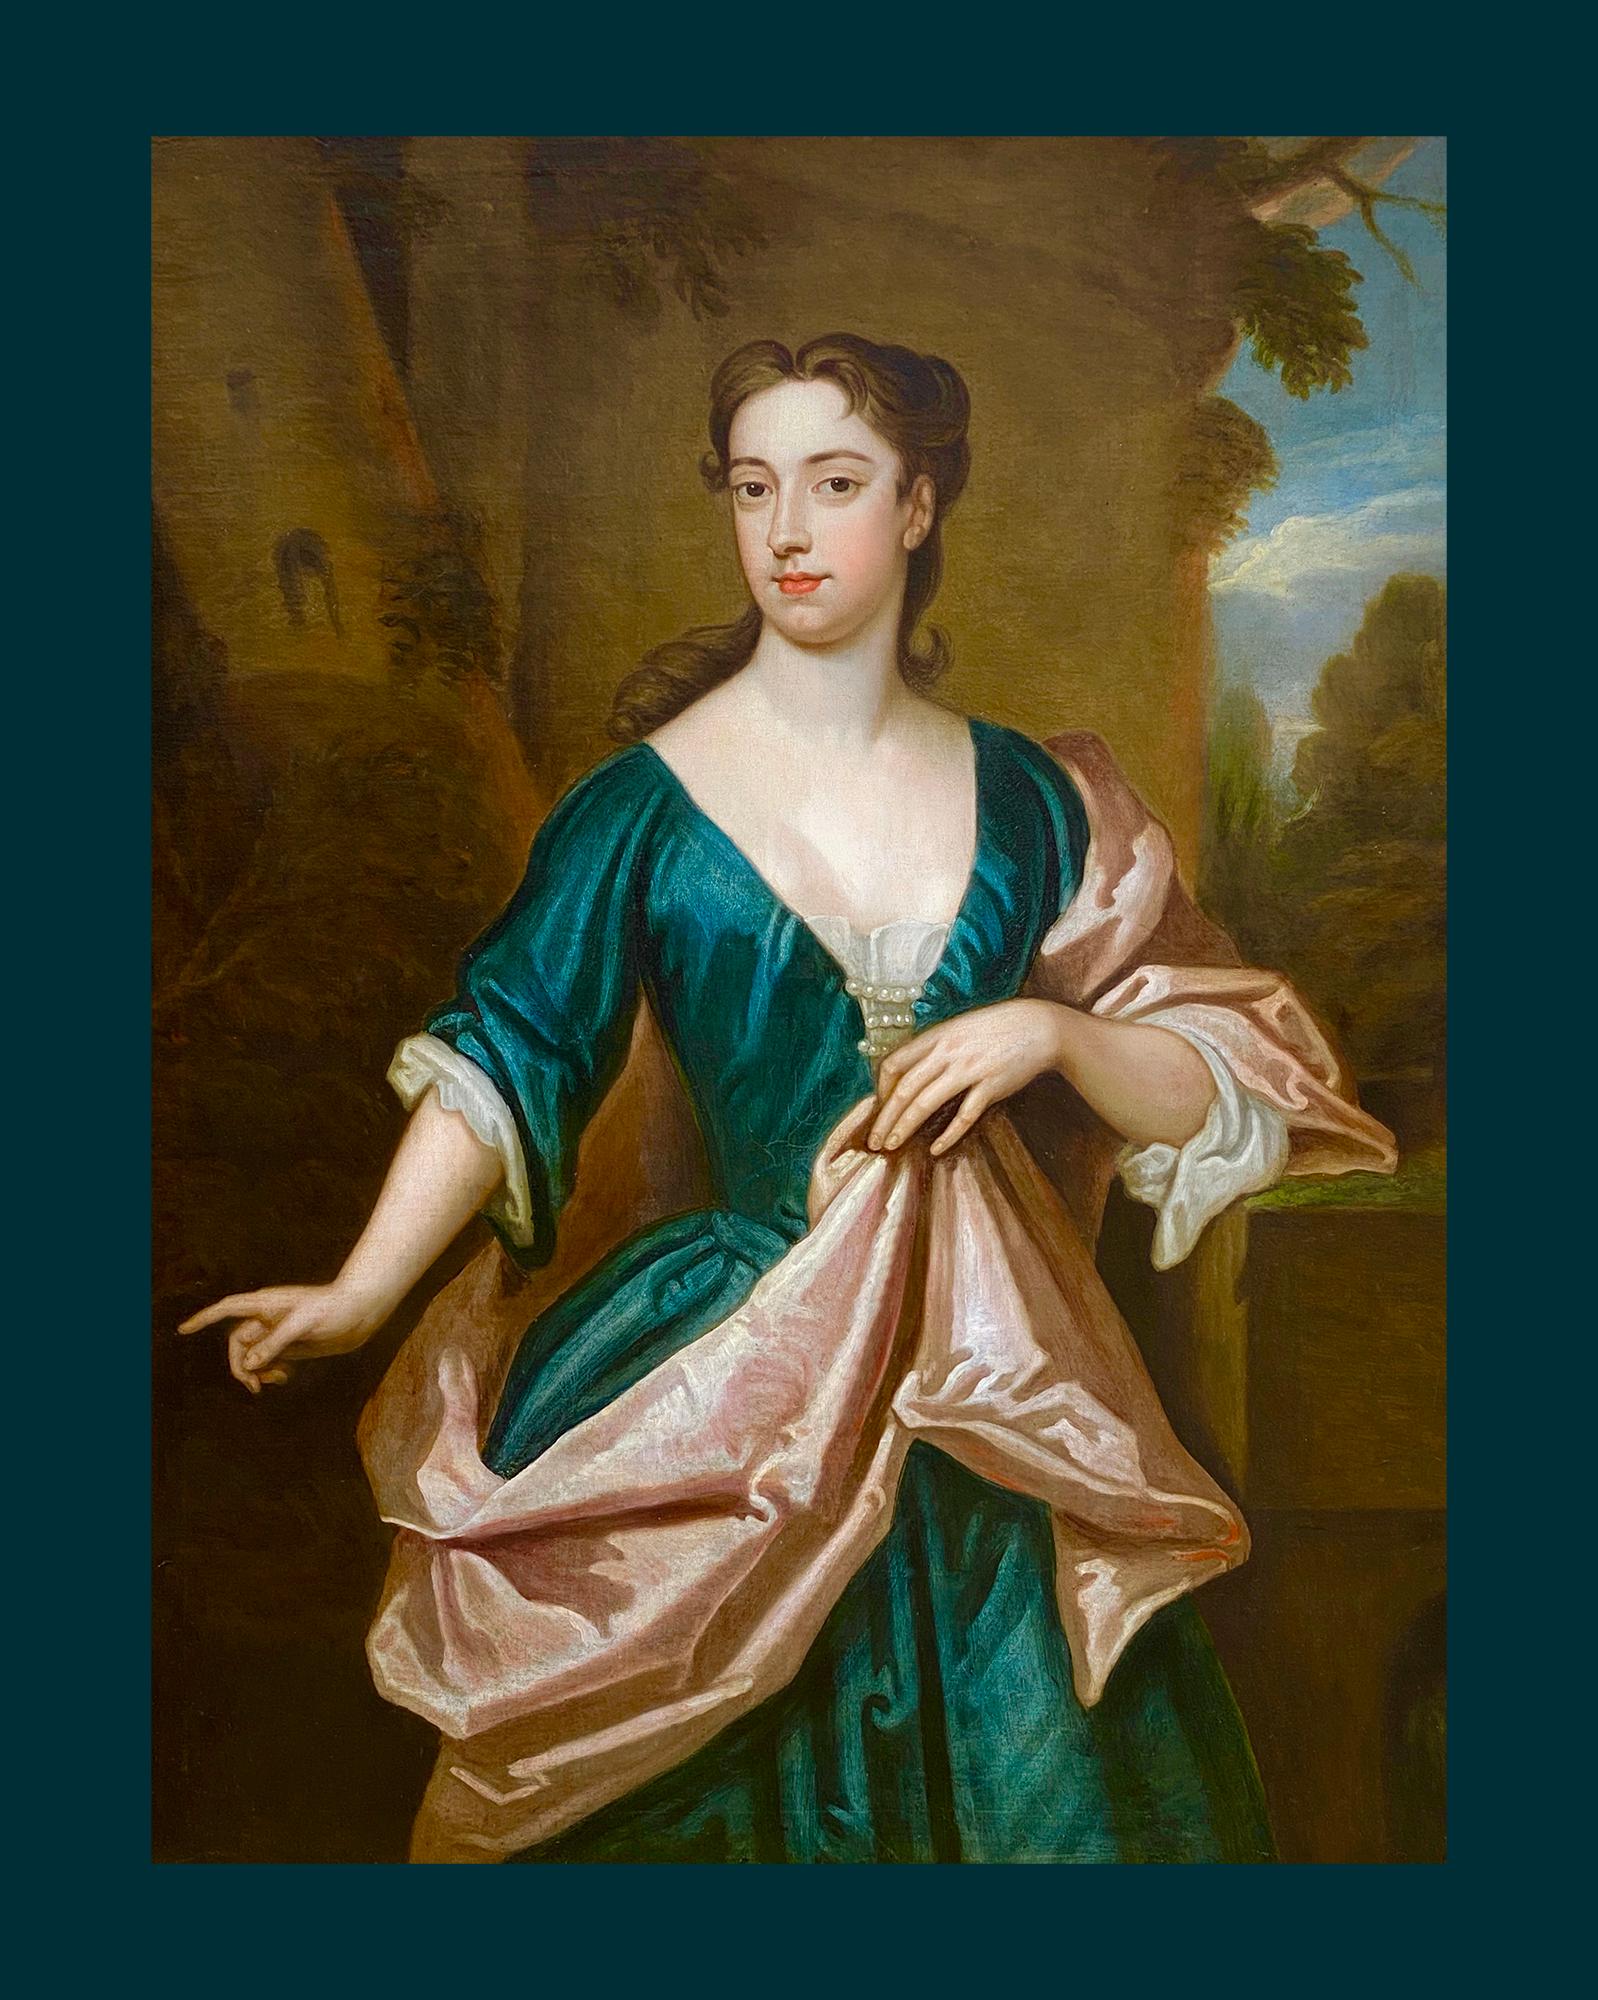 EARLY 18TH CENTURY ENGLISH PORTRAIT OF A LADY - CIRCLE OF SIR GODFREY KNELLER. - Black Portrait Painting by (Circle of) Godfrey Kneller